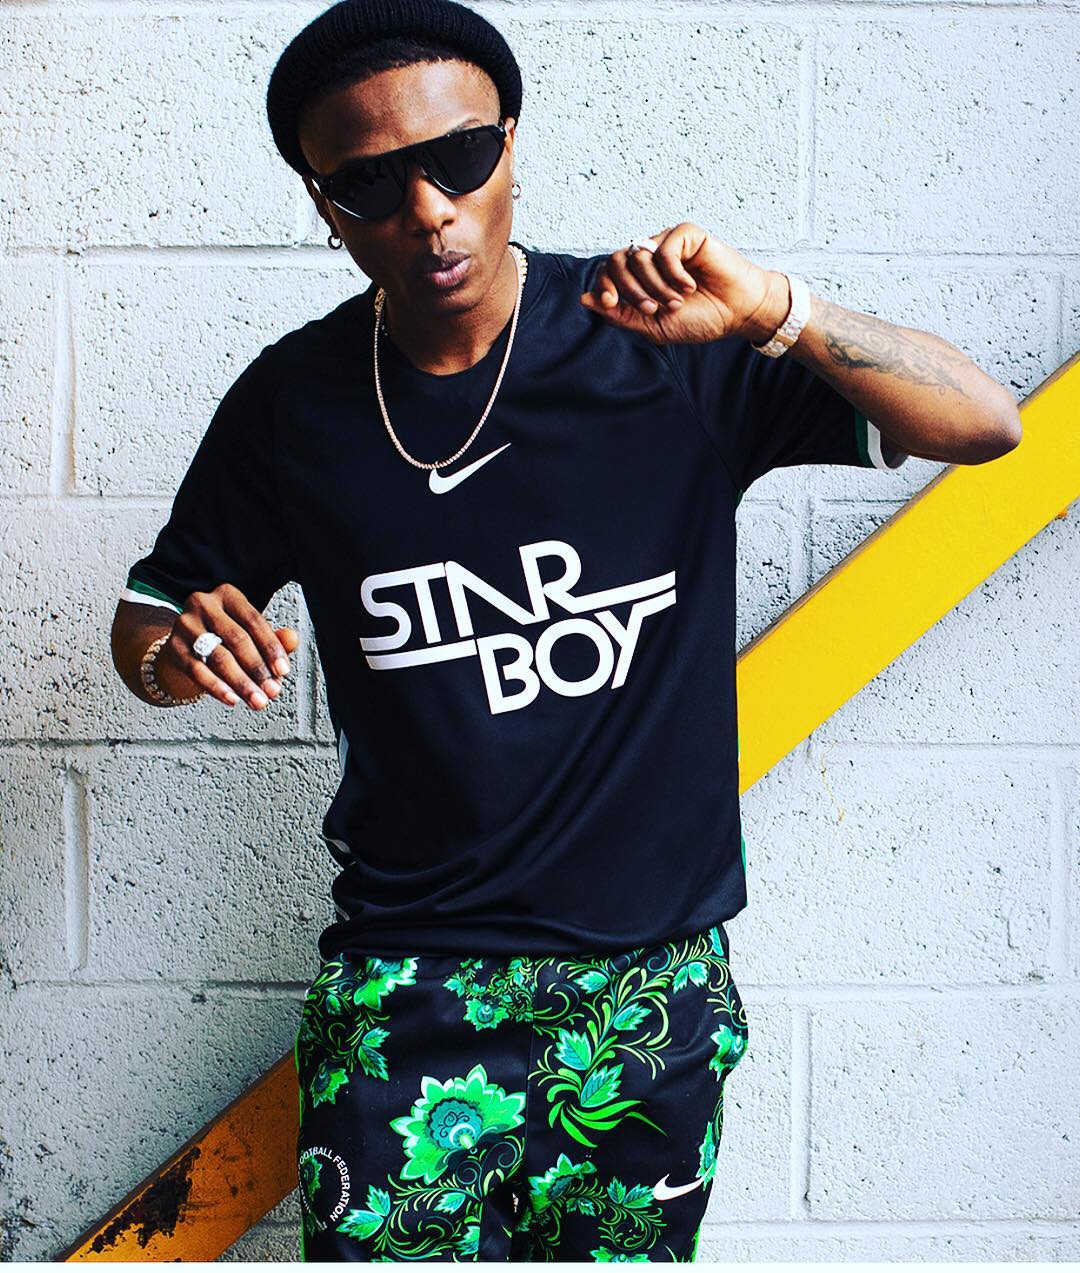 Predictably Wizkid’s co-creation Jersey with Nike sells out in Minutes